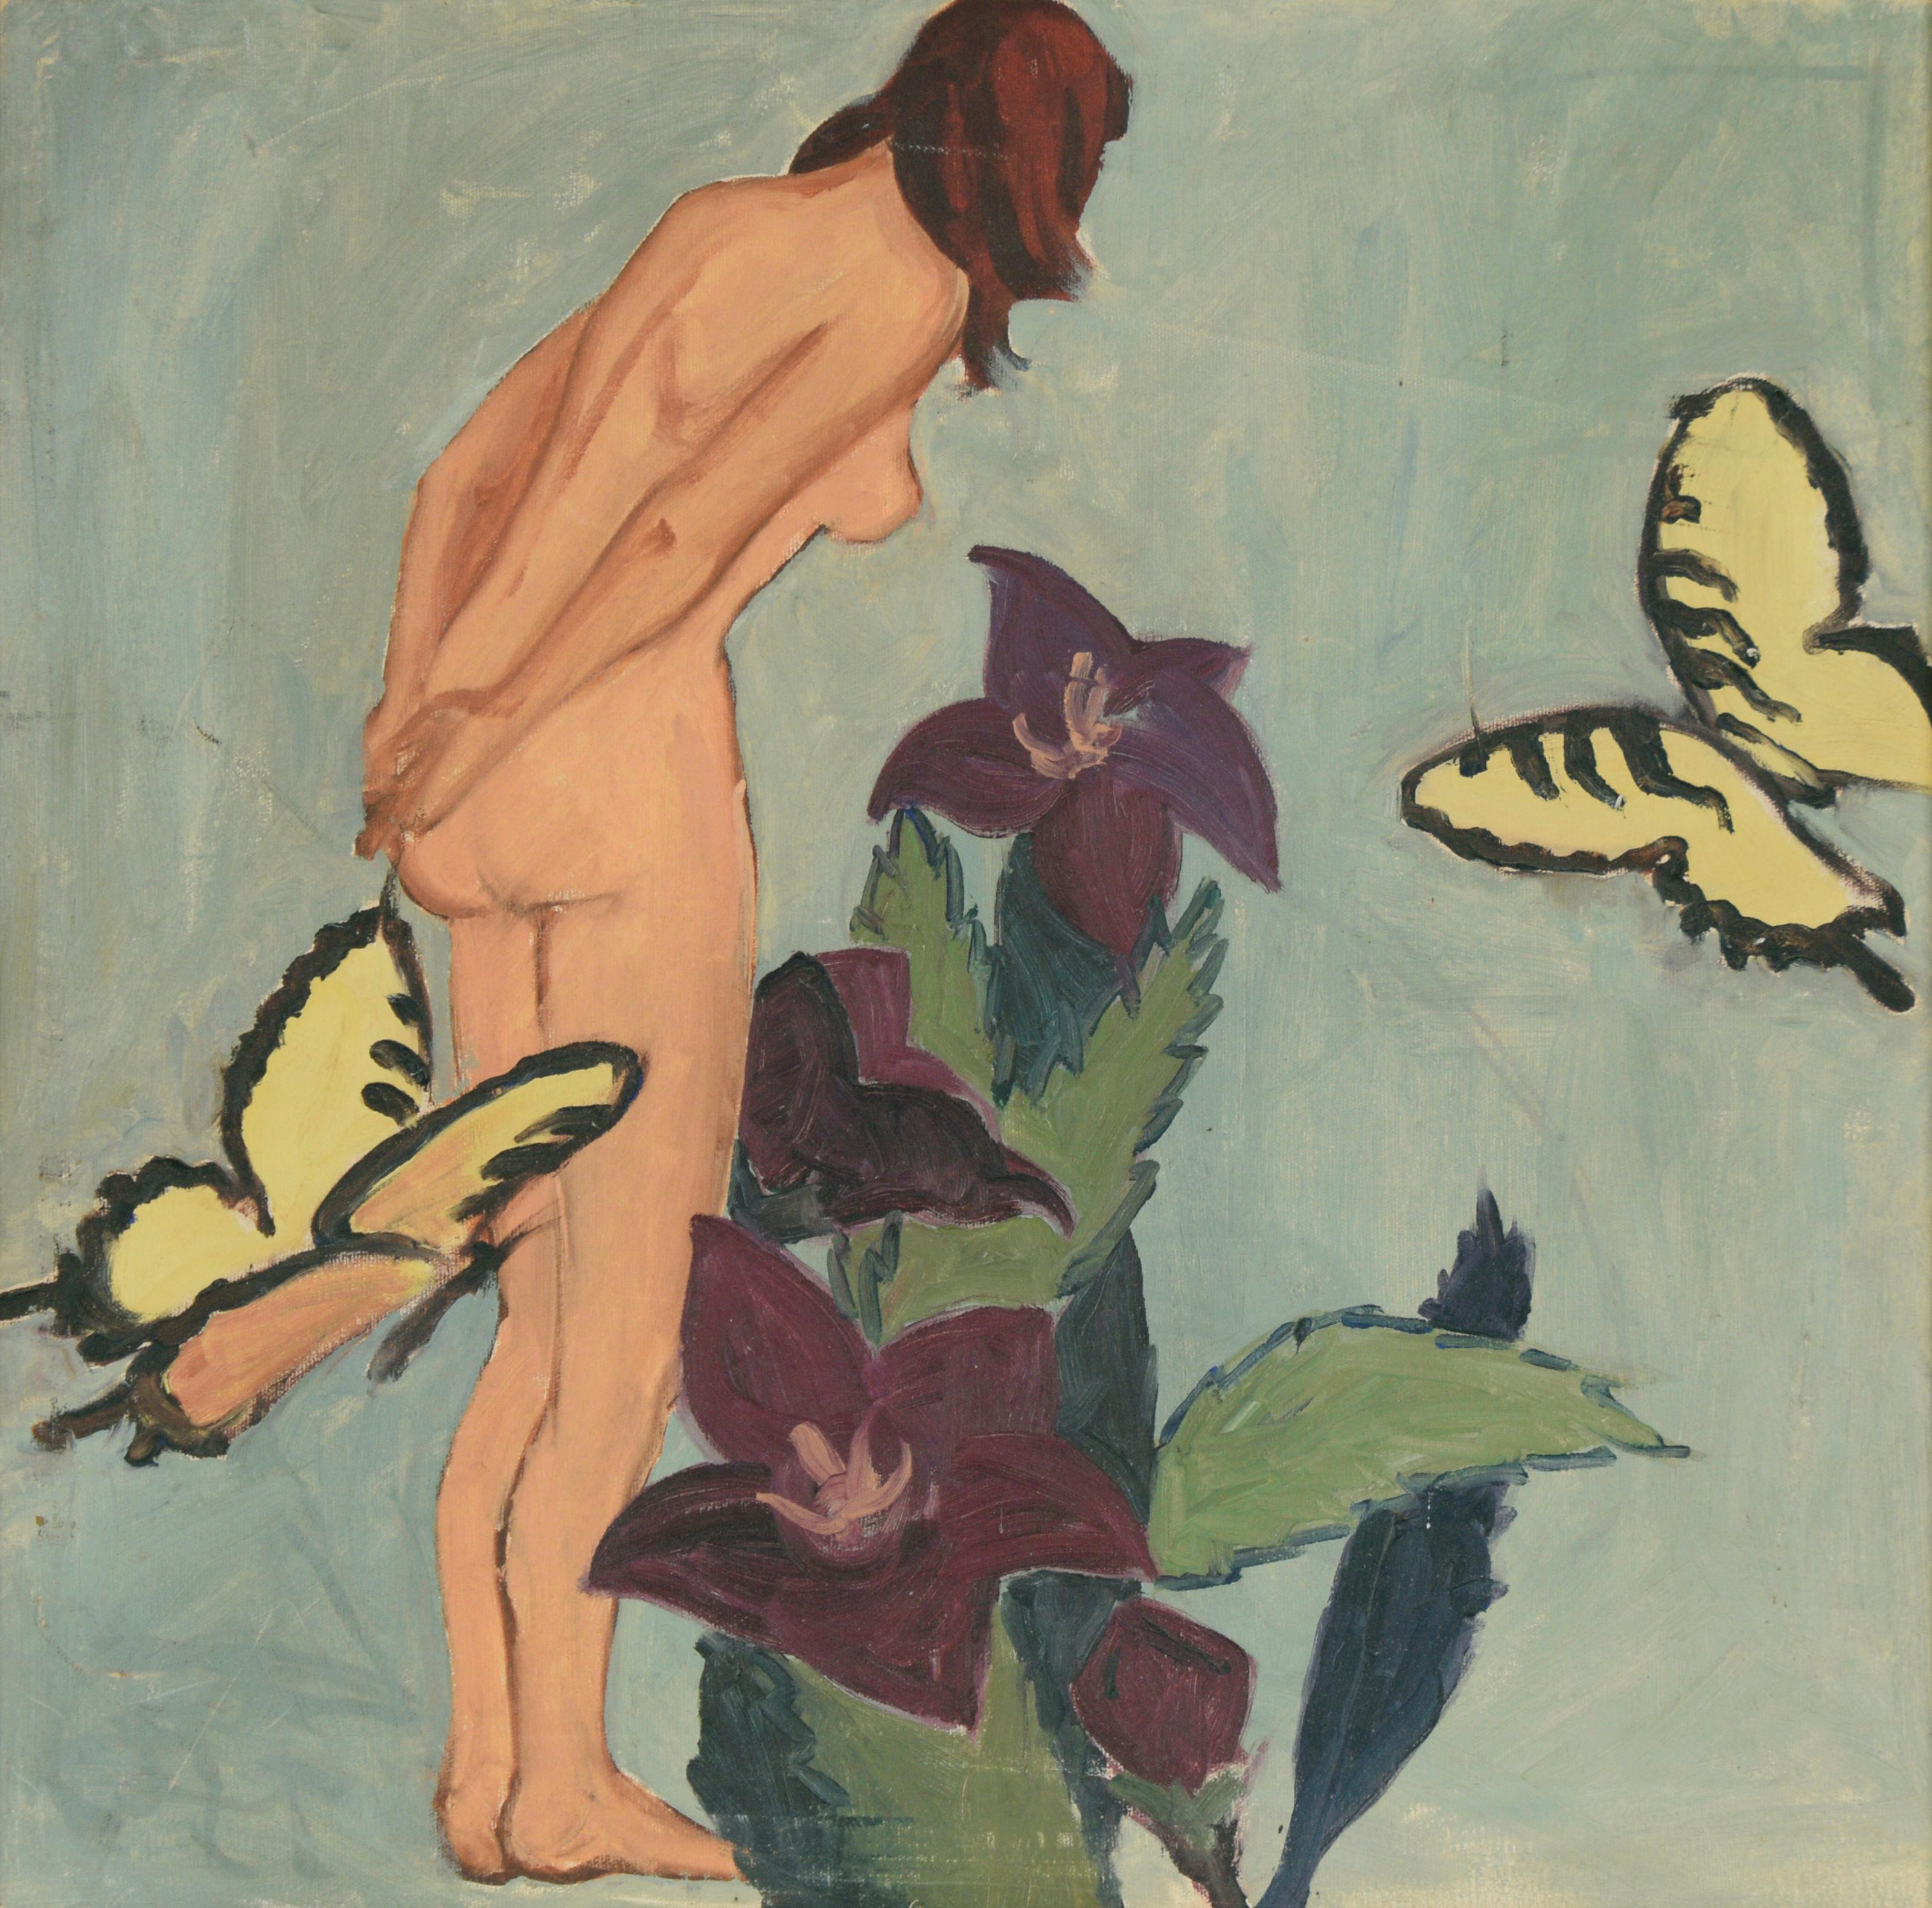 A Redheads Dream - Figurative Nude With Butterflies and Flowers  - Painting by Unknown